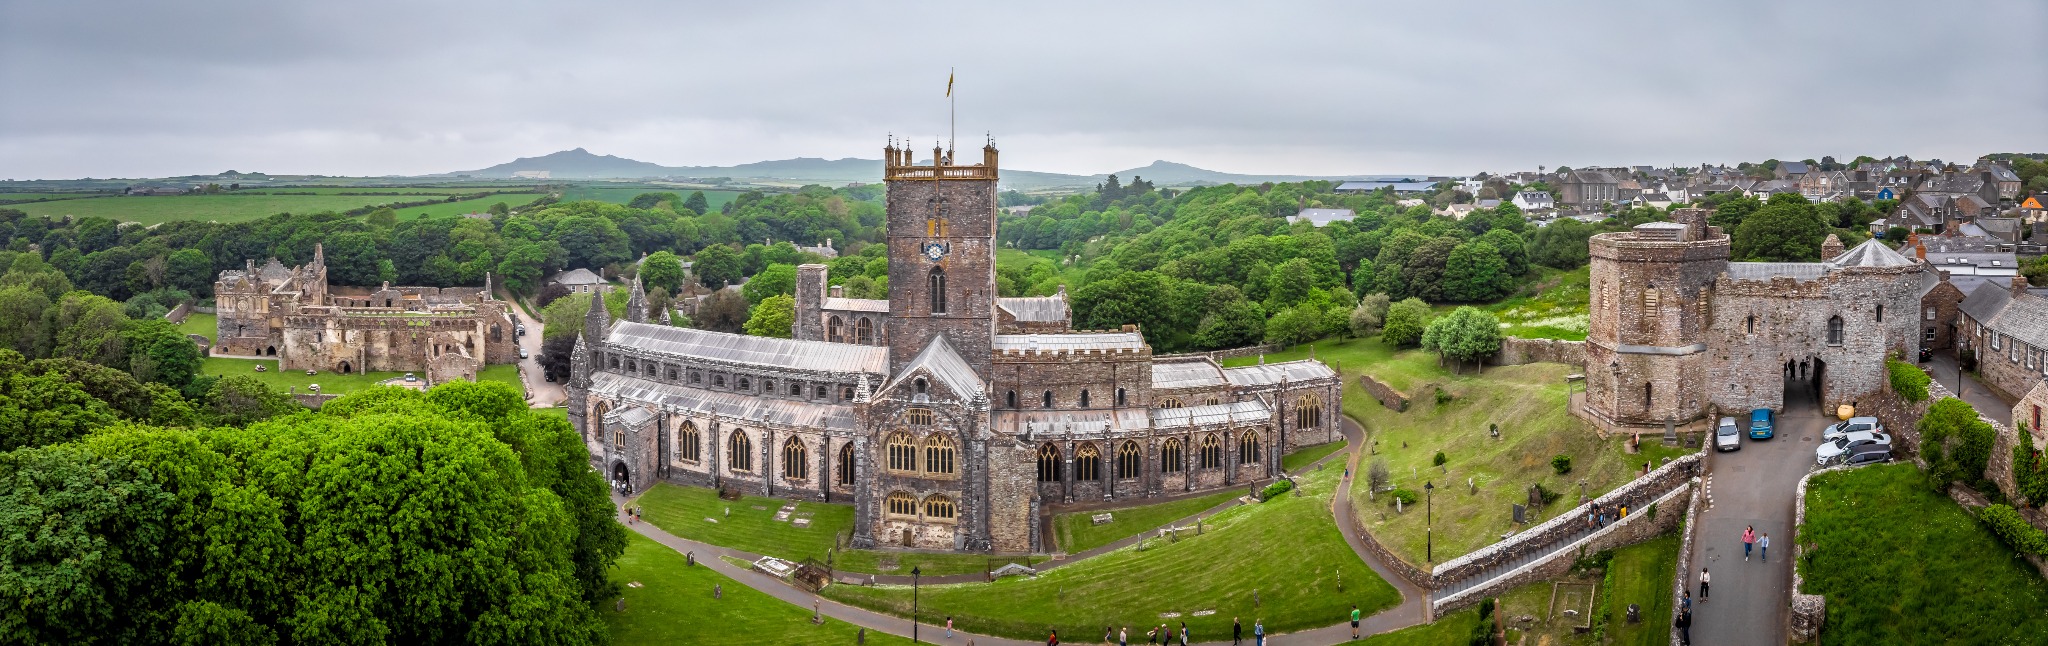 St. David's Cathedral in Wales